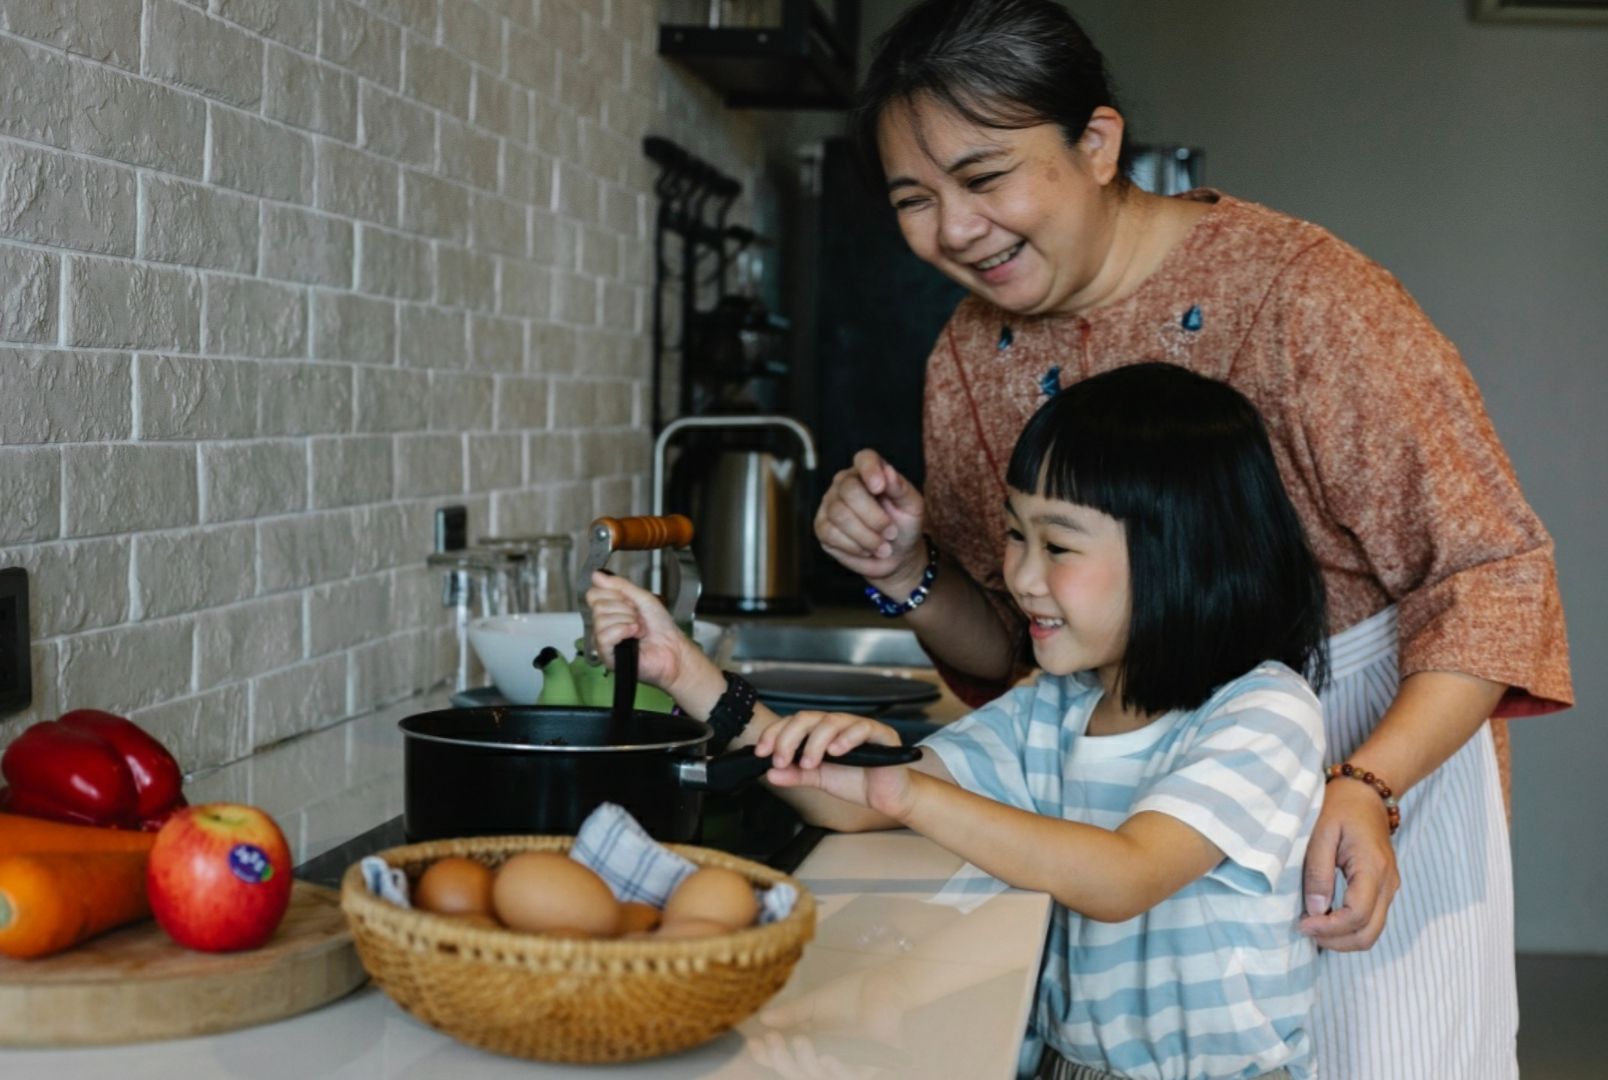 Photo by Alex Green: https://www.pexels.com/photo/asian-woman-with-granddaughter-preparing-food-5693017/